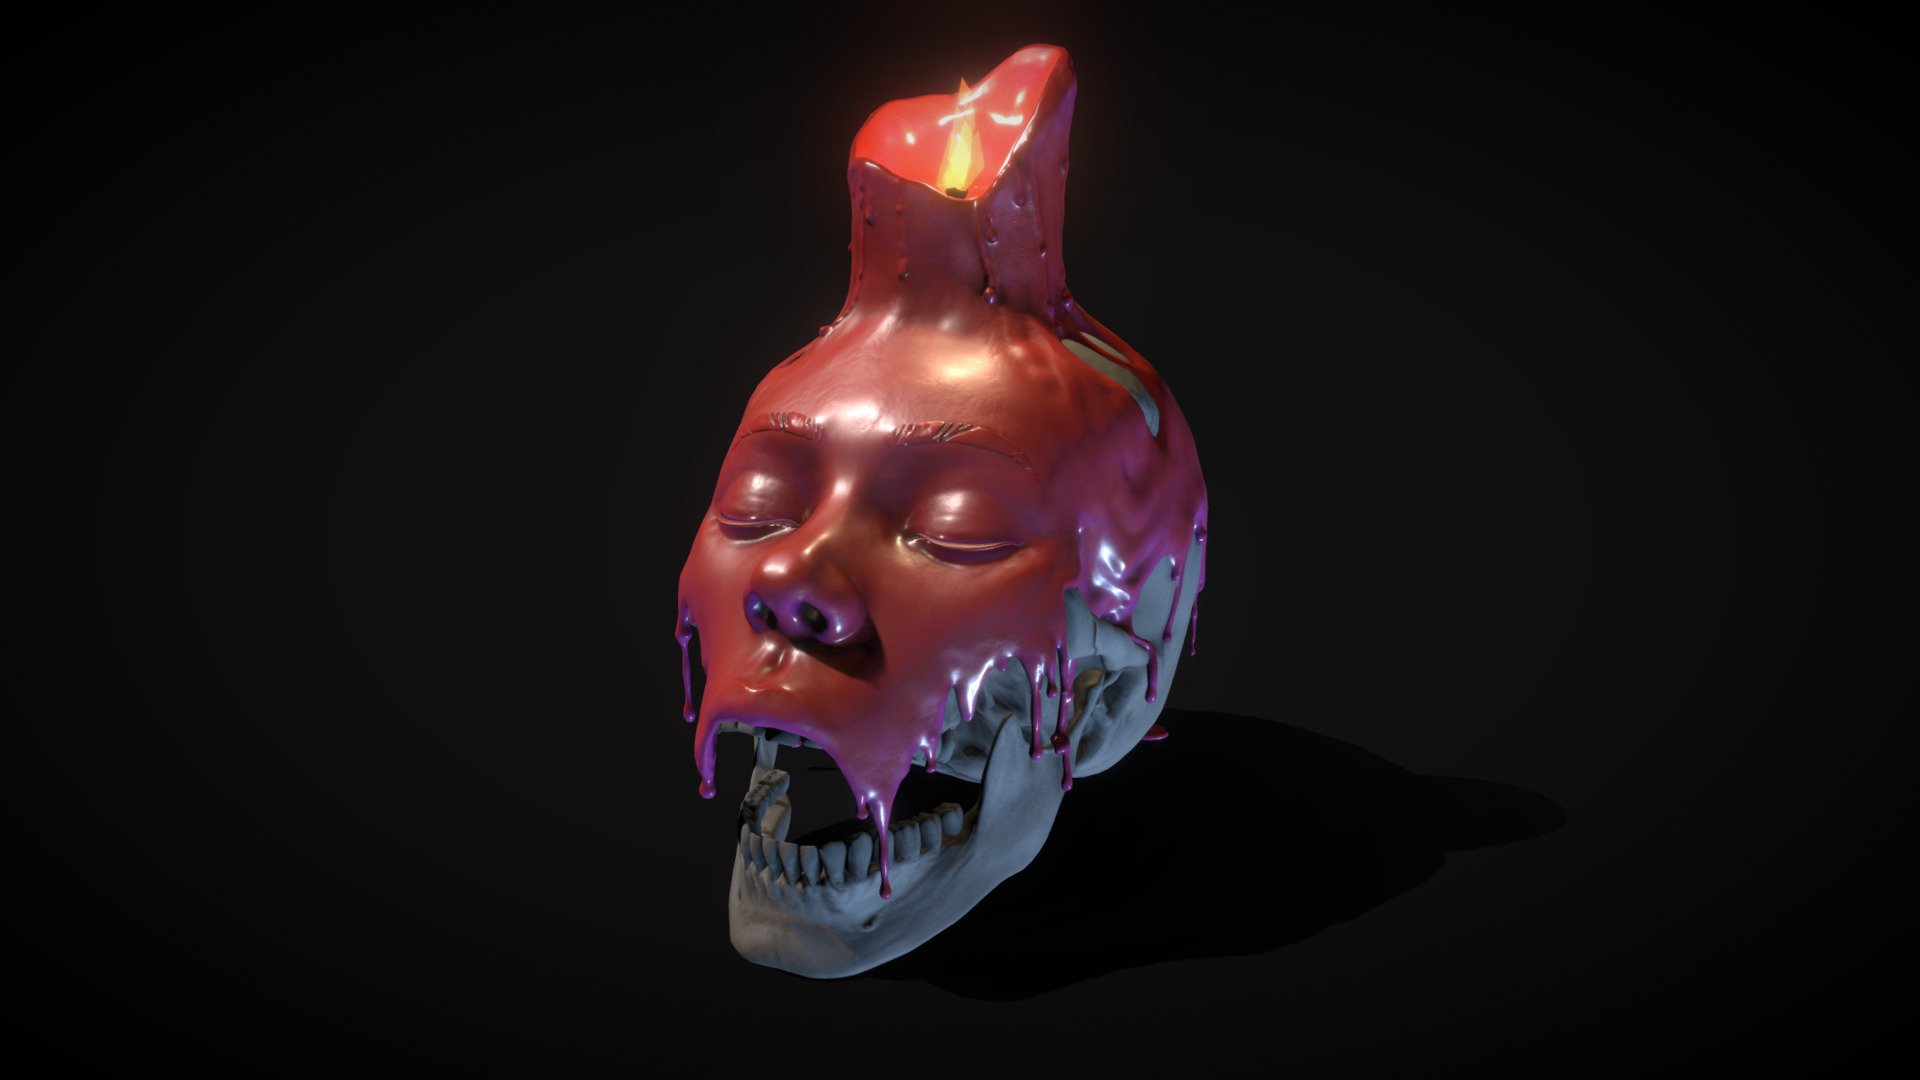 Personnal project i have been working on for some time now. I love the idea of some forms appearing with fluids and time and wanted to sculpt this 3d model